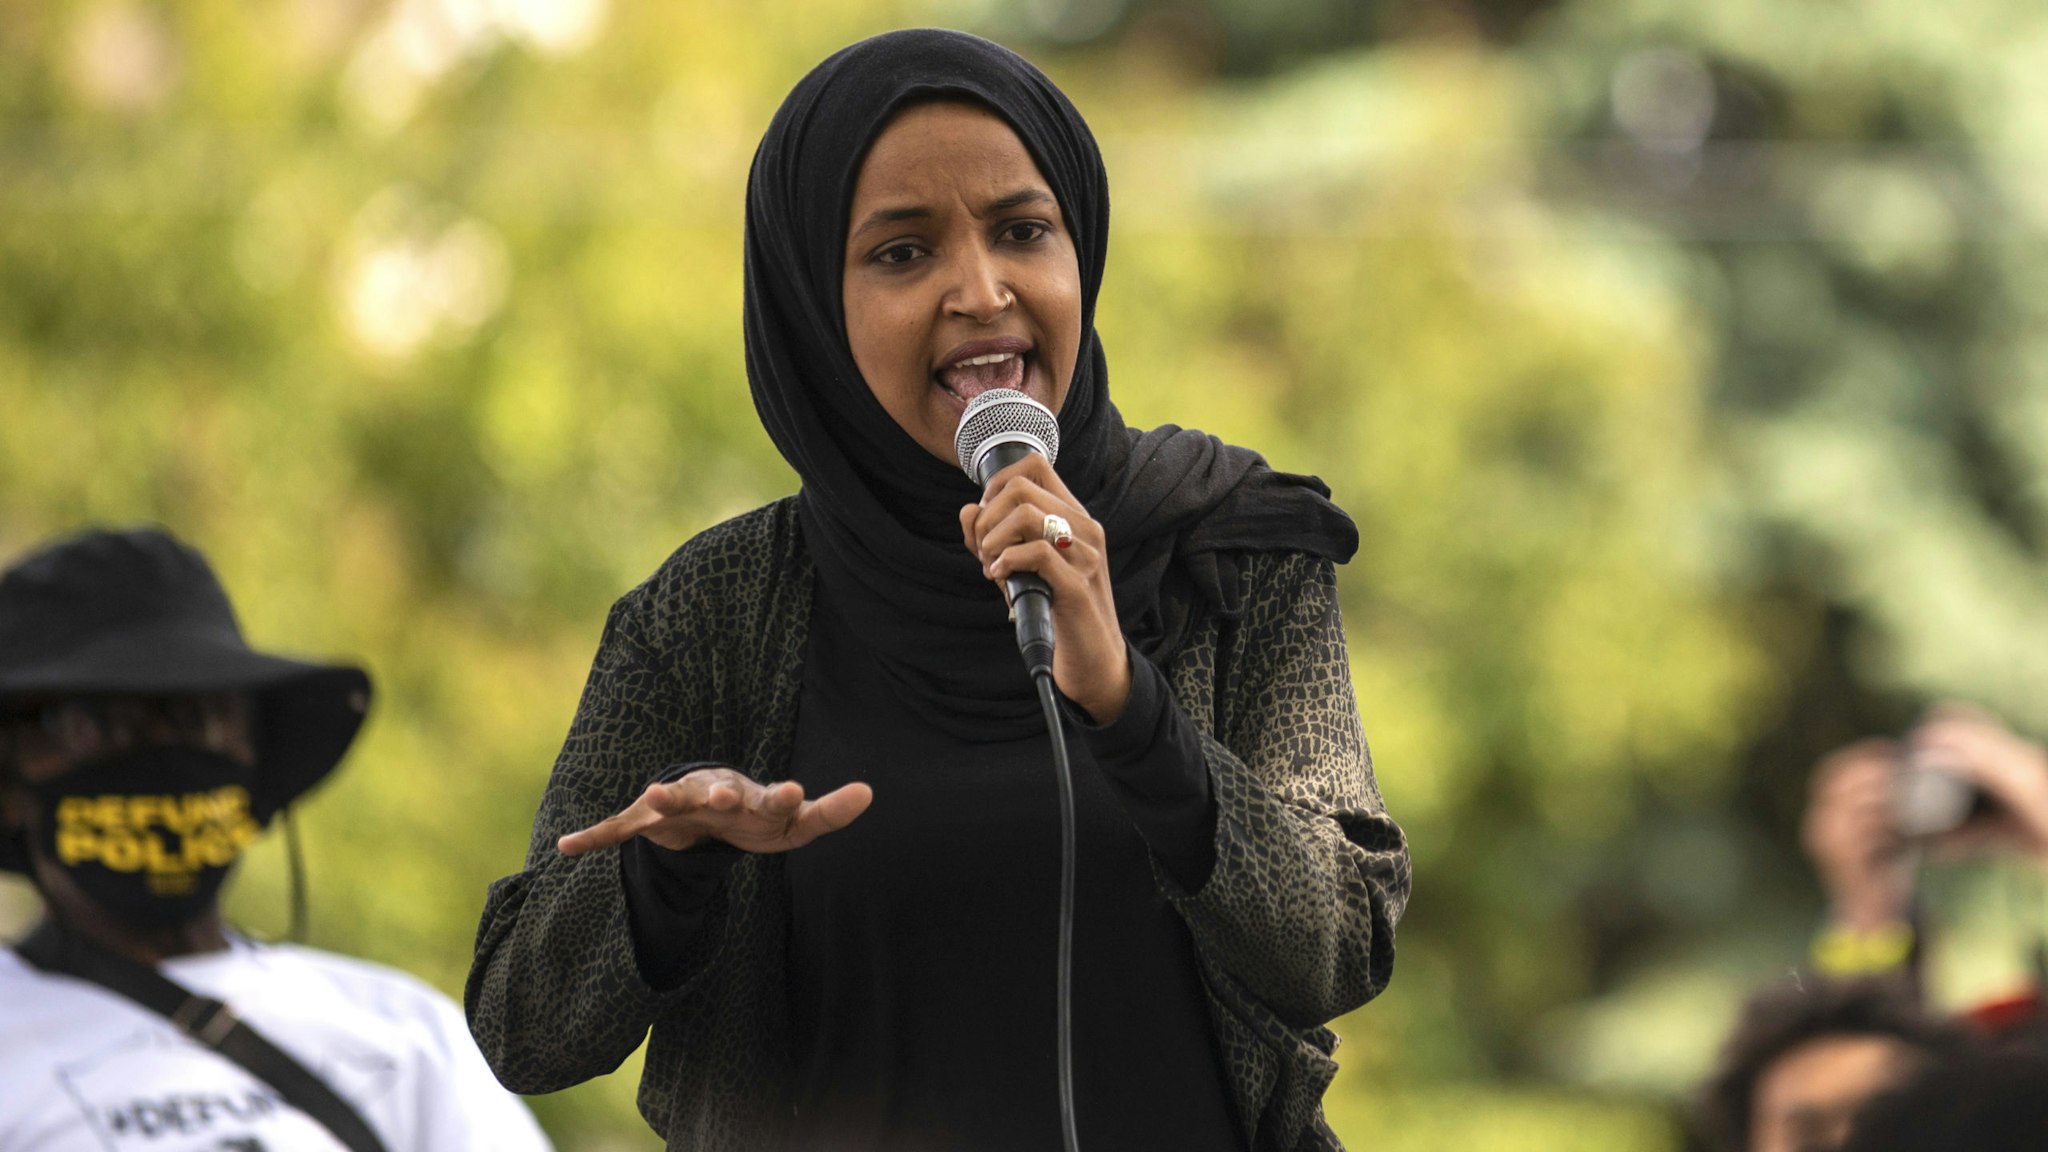 MINNEAPOLIS, MN - JUNE 6: Rep. Ilhan Omar (D-MN) speaks to a crowd gathered for a march to defund the Minneapolis Police Department on June 6, 2020 in Minneapolis, Minnesota. The march commemorated the life of George Floyd who was killed by members of the MPD on May 25.